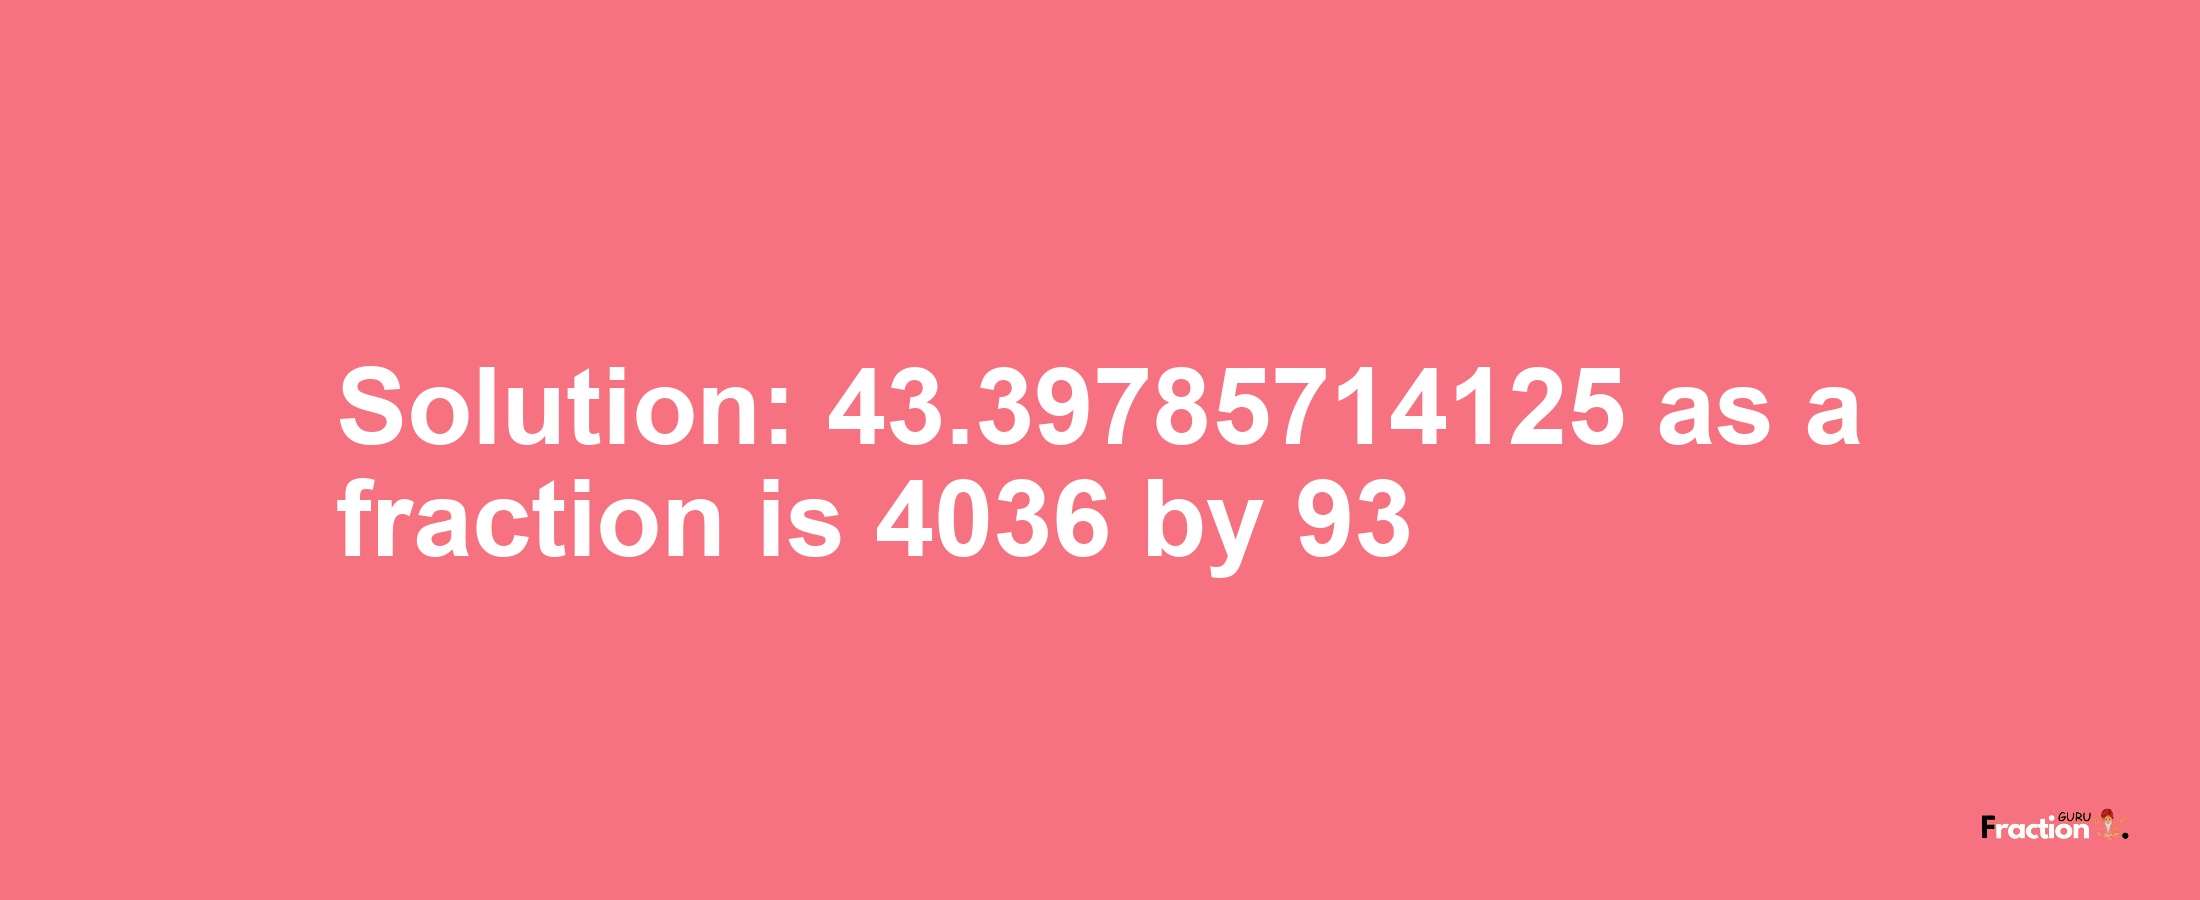 Solution:43.39785714125 as a fraction is 4036/93